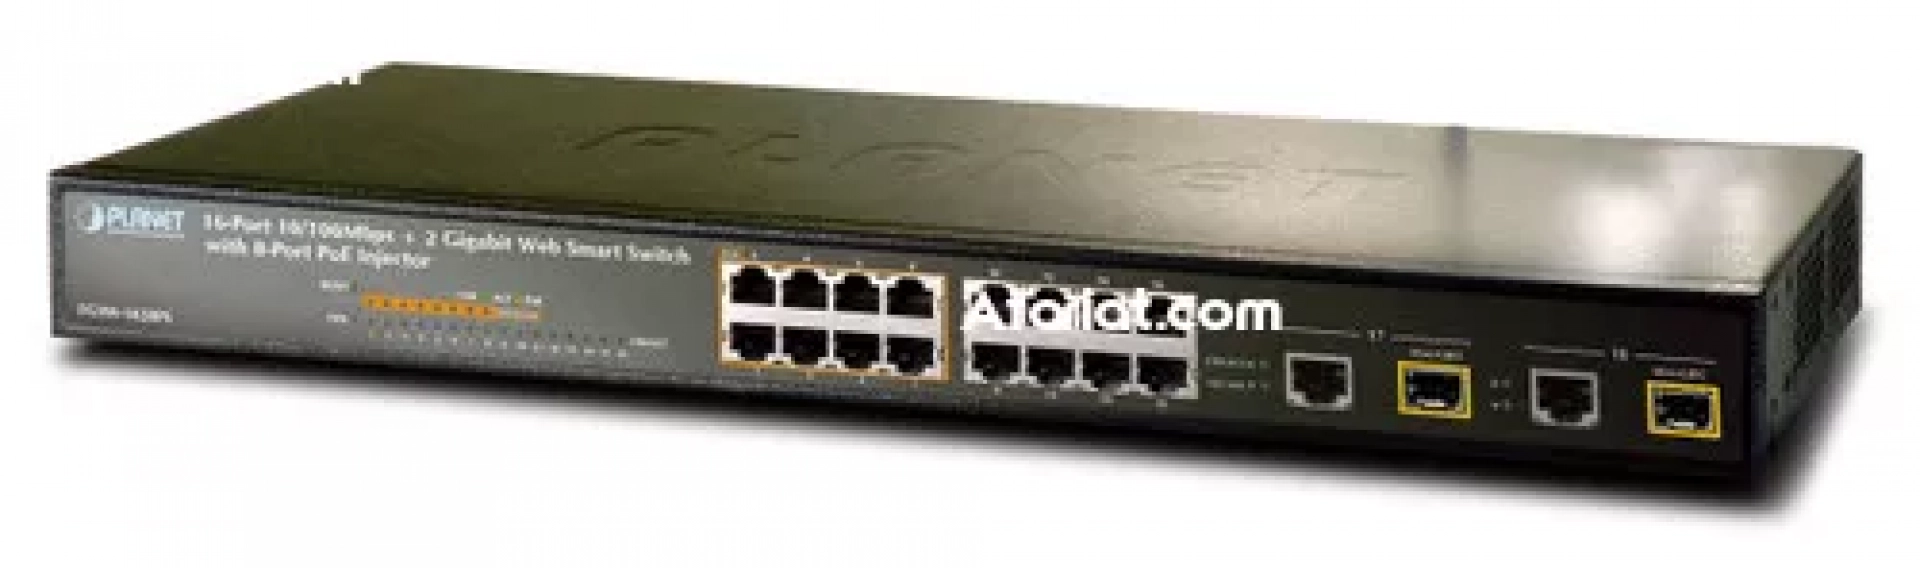 Planet FGSW-1828PS 24-Port PoE Web Smart Ethernet Switch